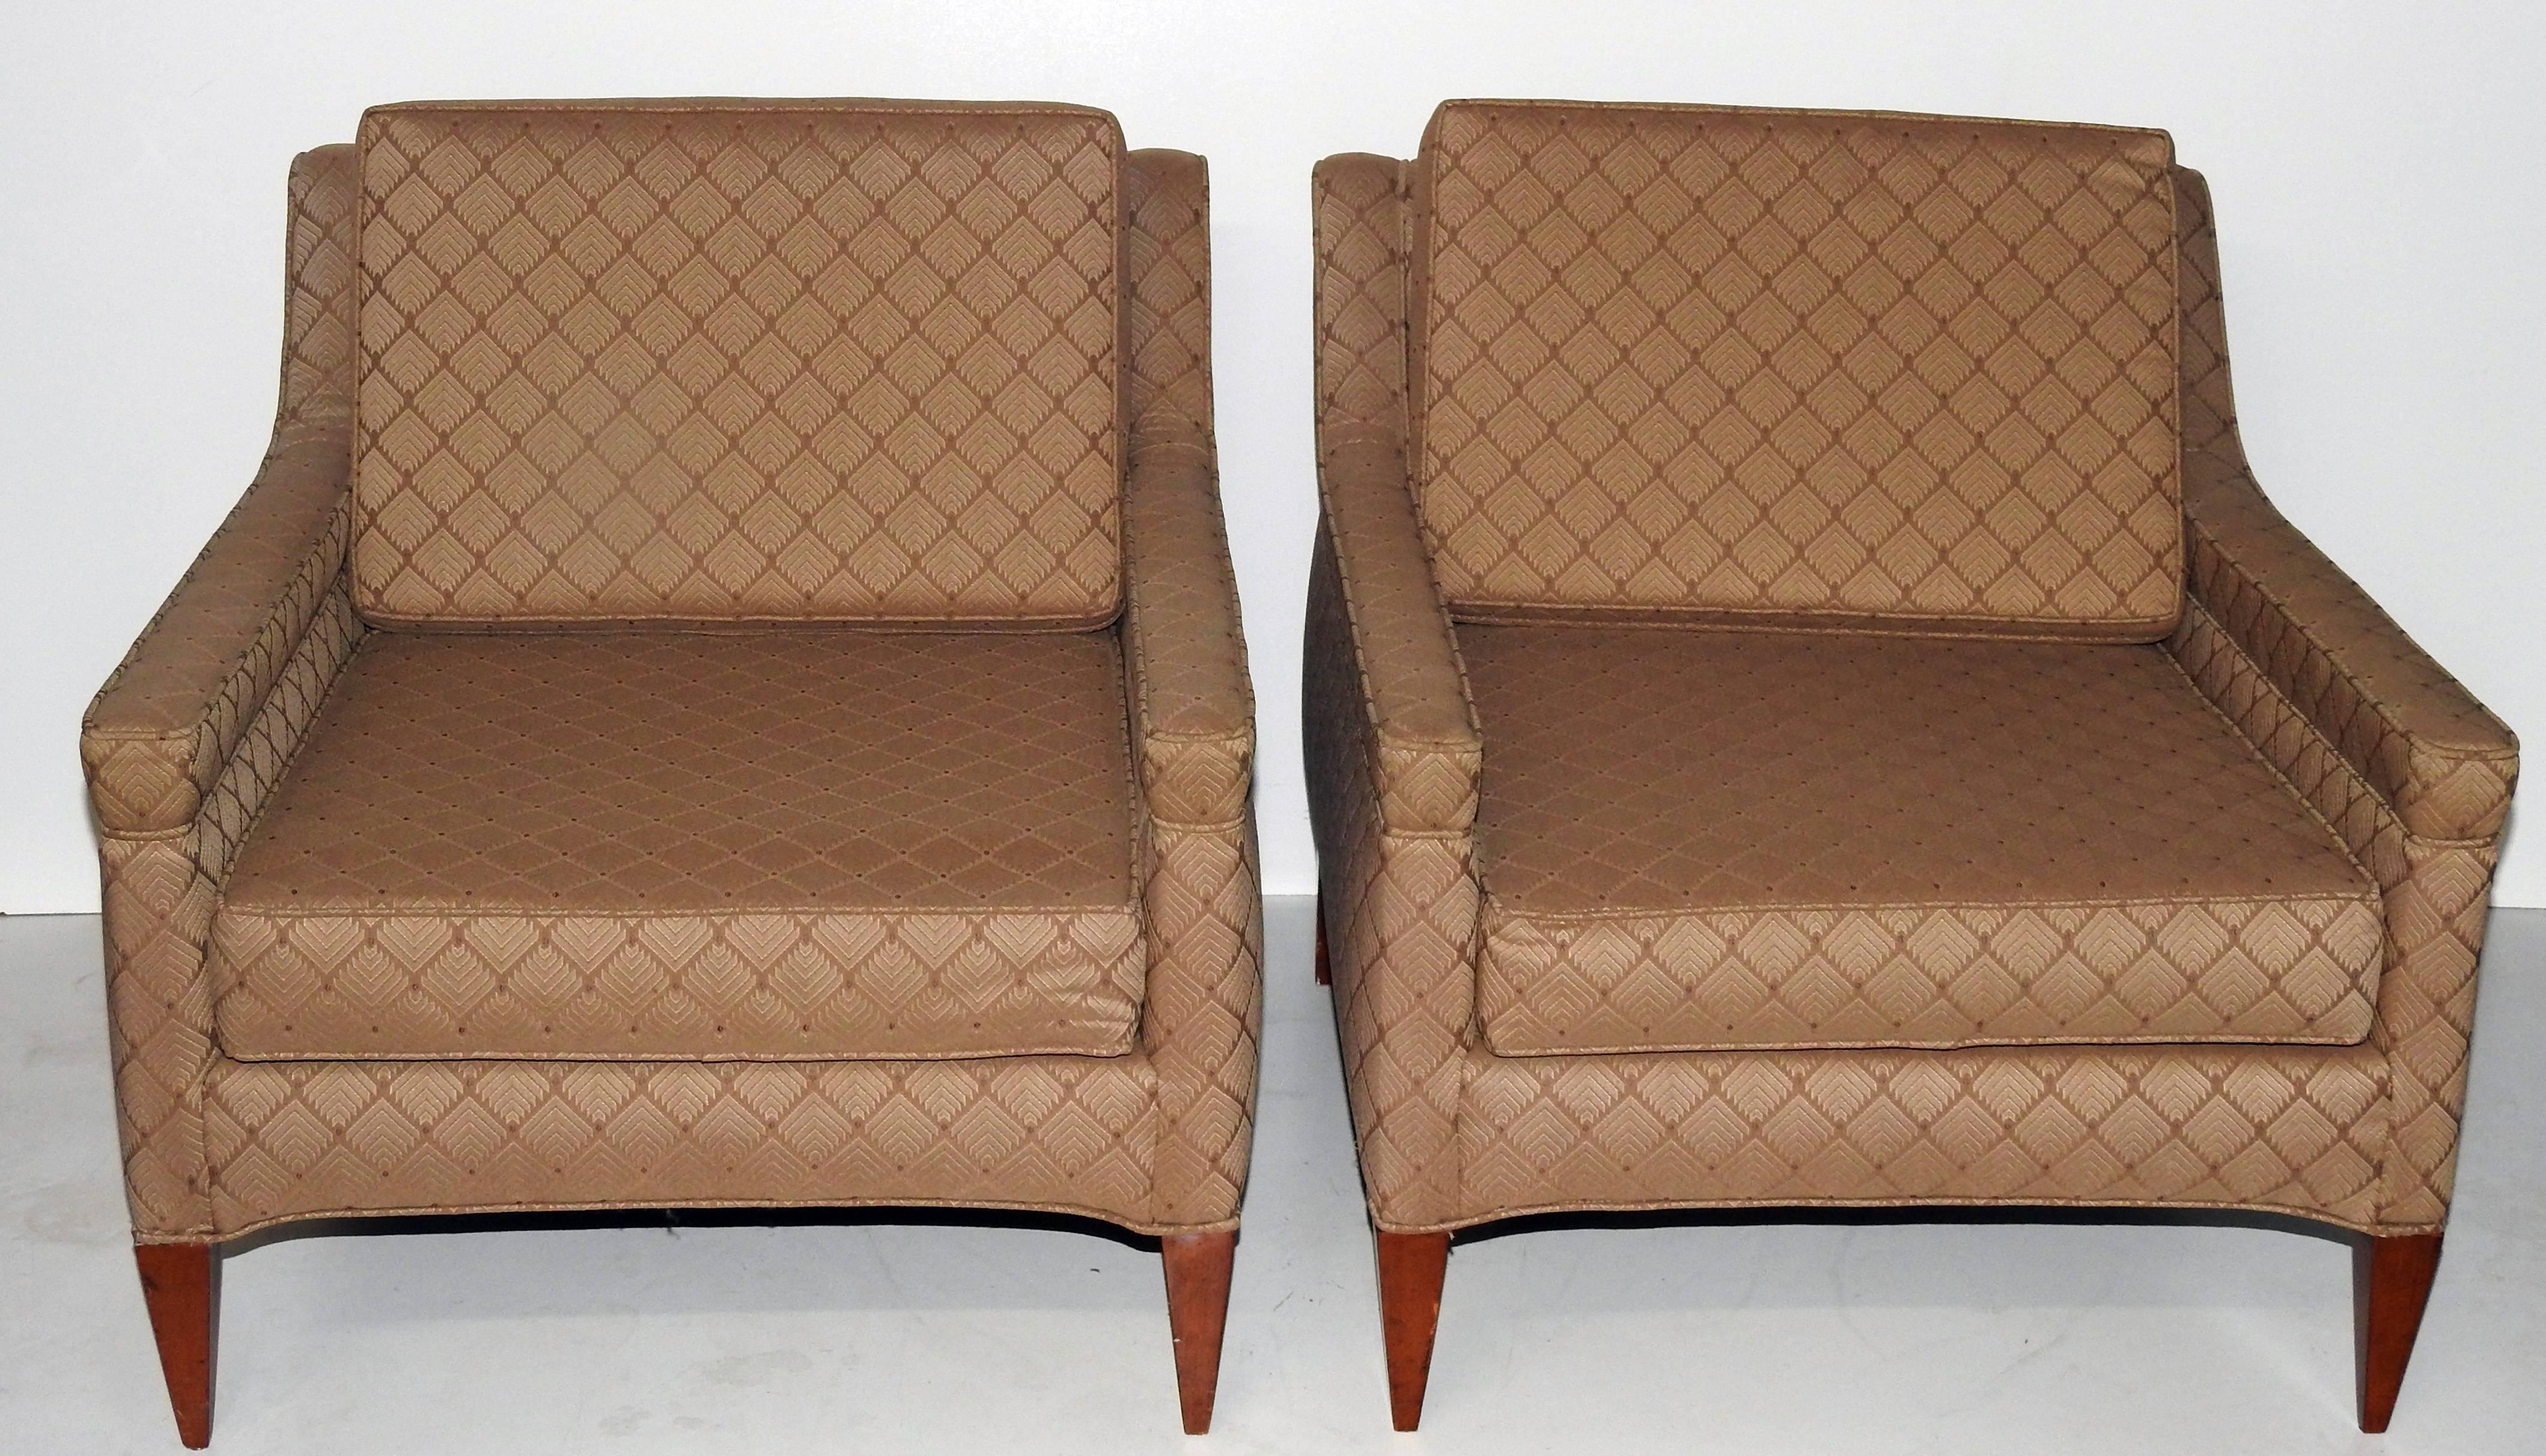 Pair of Mid-Century Modern upholstered club chairs on walnut legs by Dunbar.